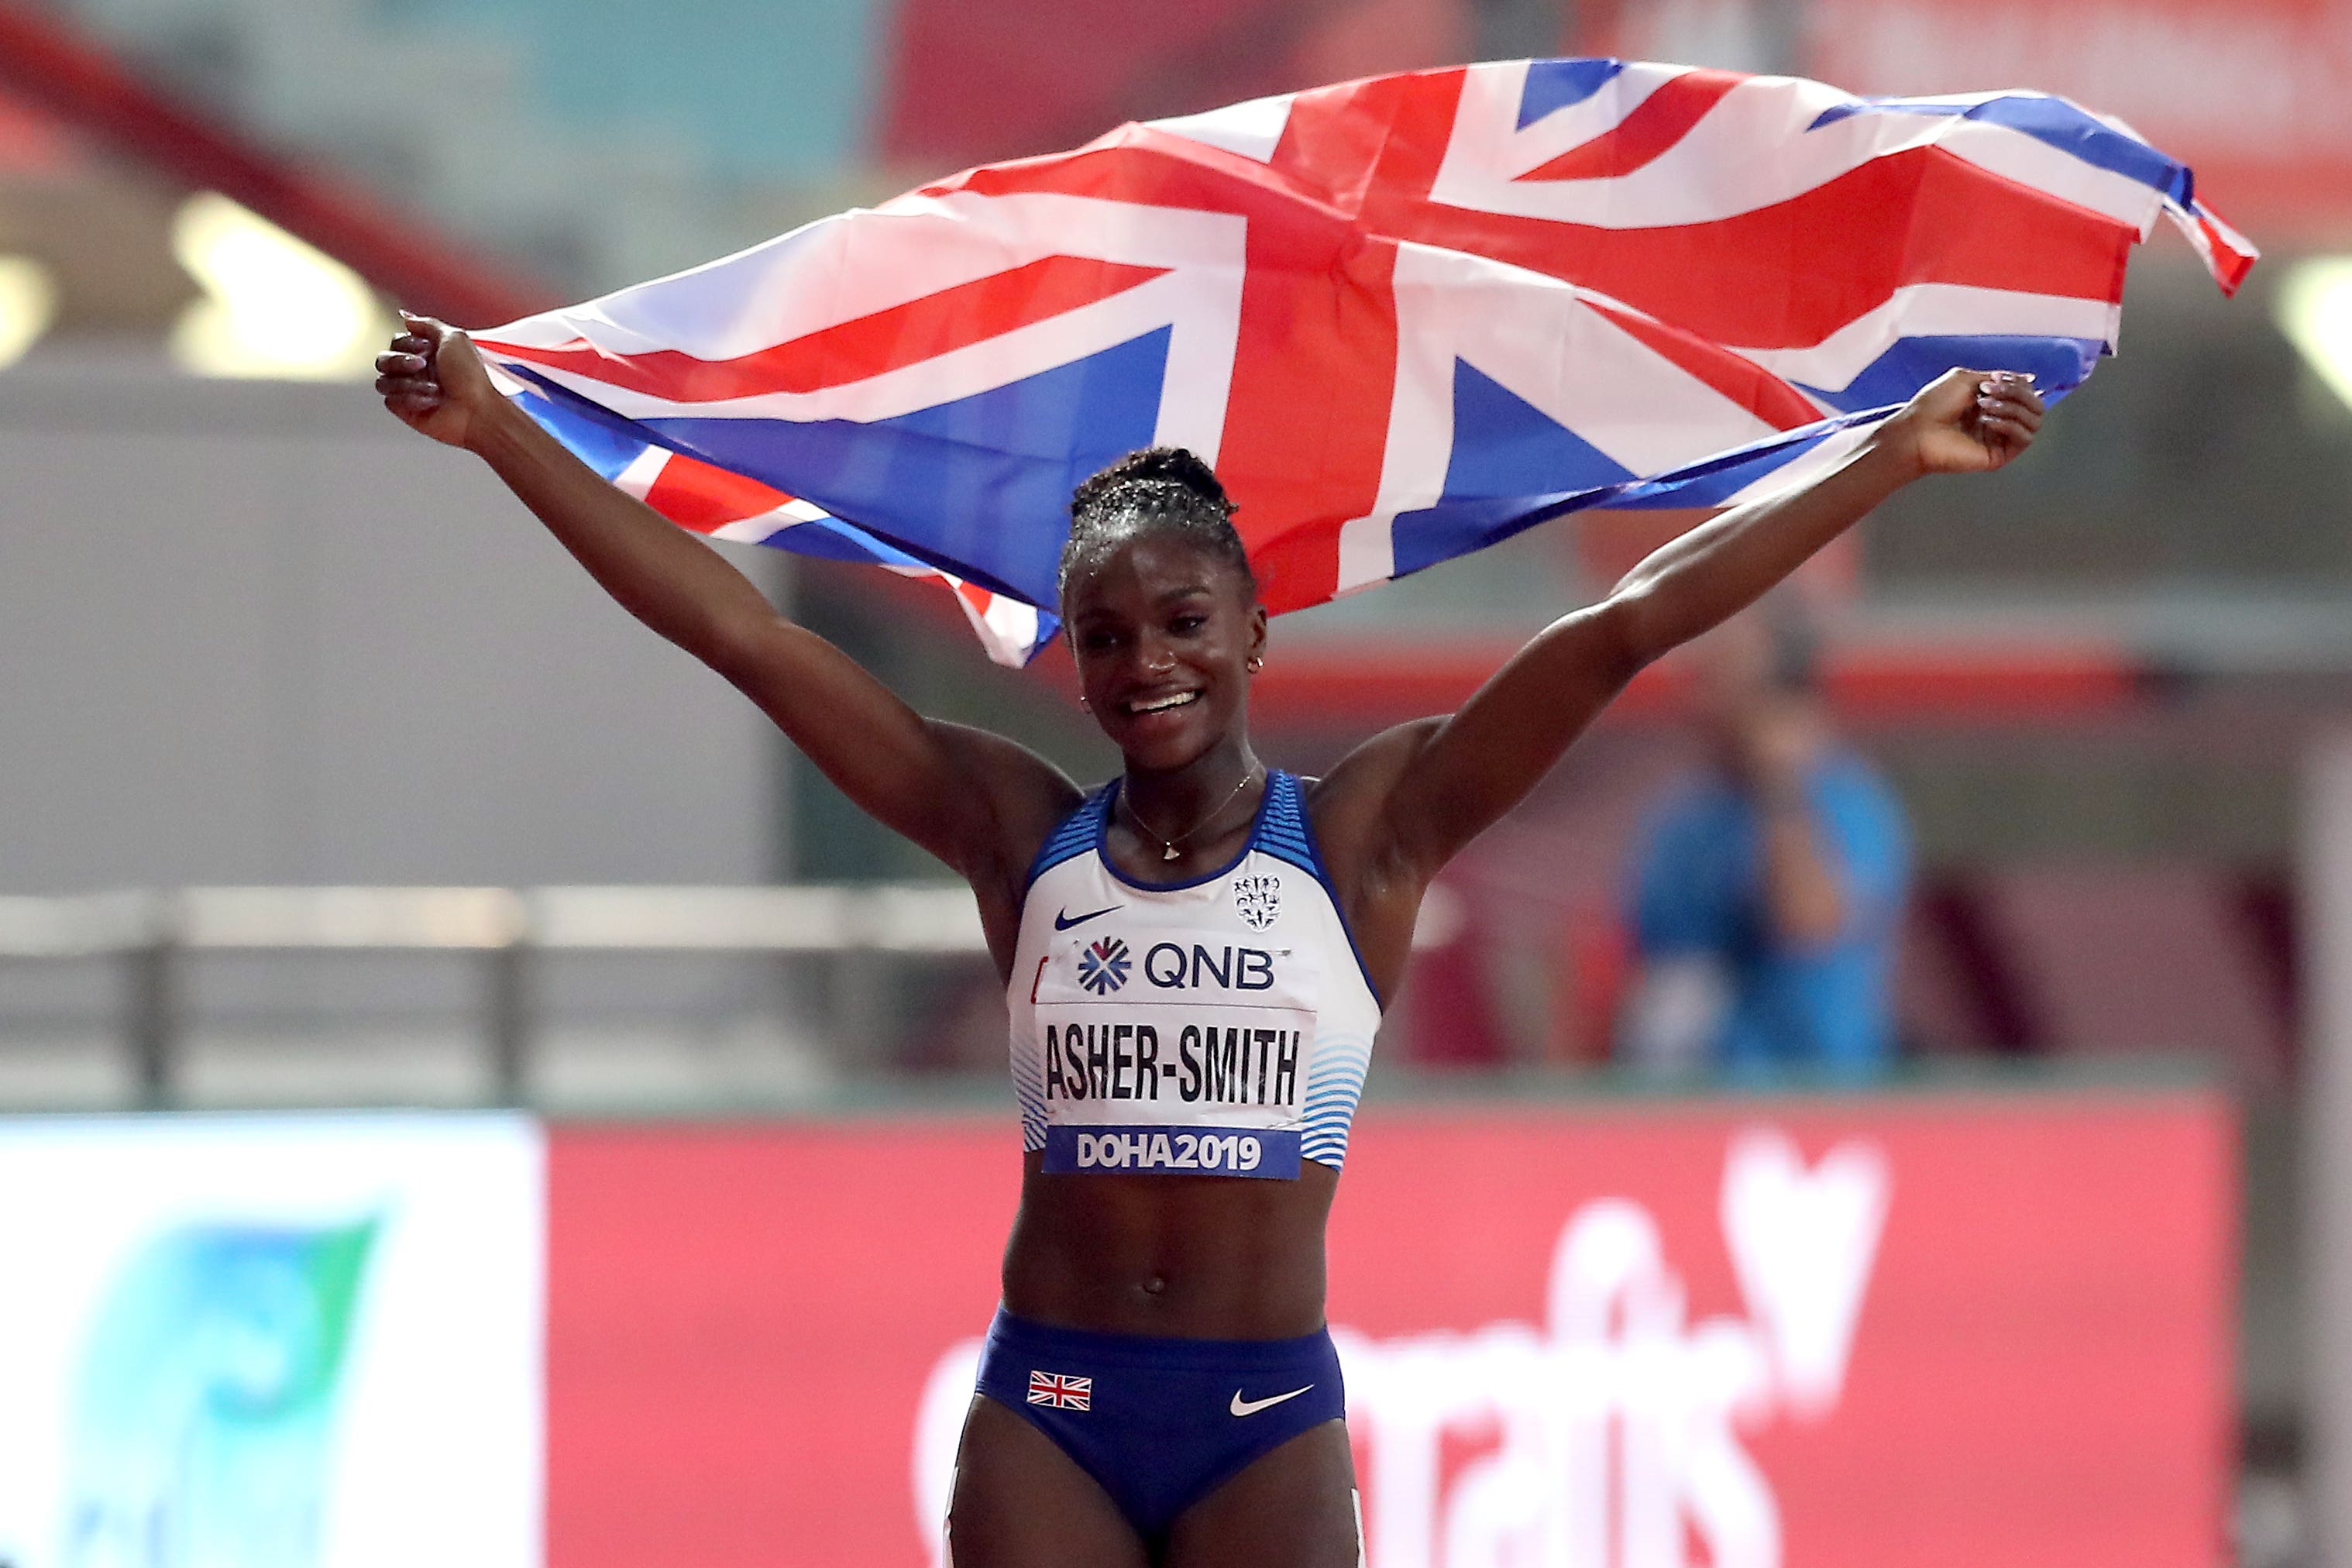 On This Day in 2019: Dina Asher-Smith wins gold at World Athletics